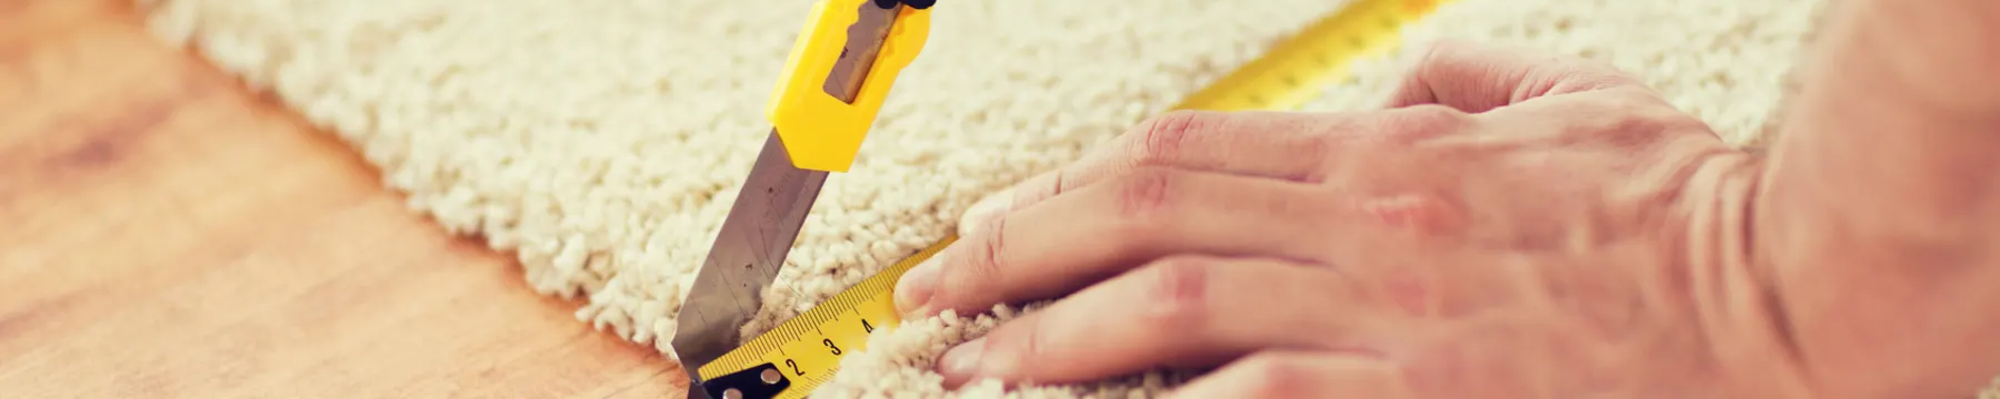 Commercial Carpet | Quality Carpets and Flooring | Munster, IN